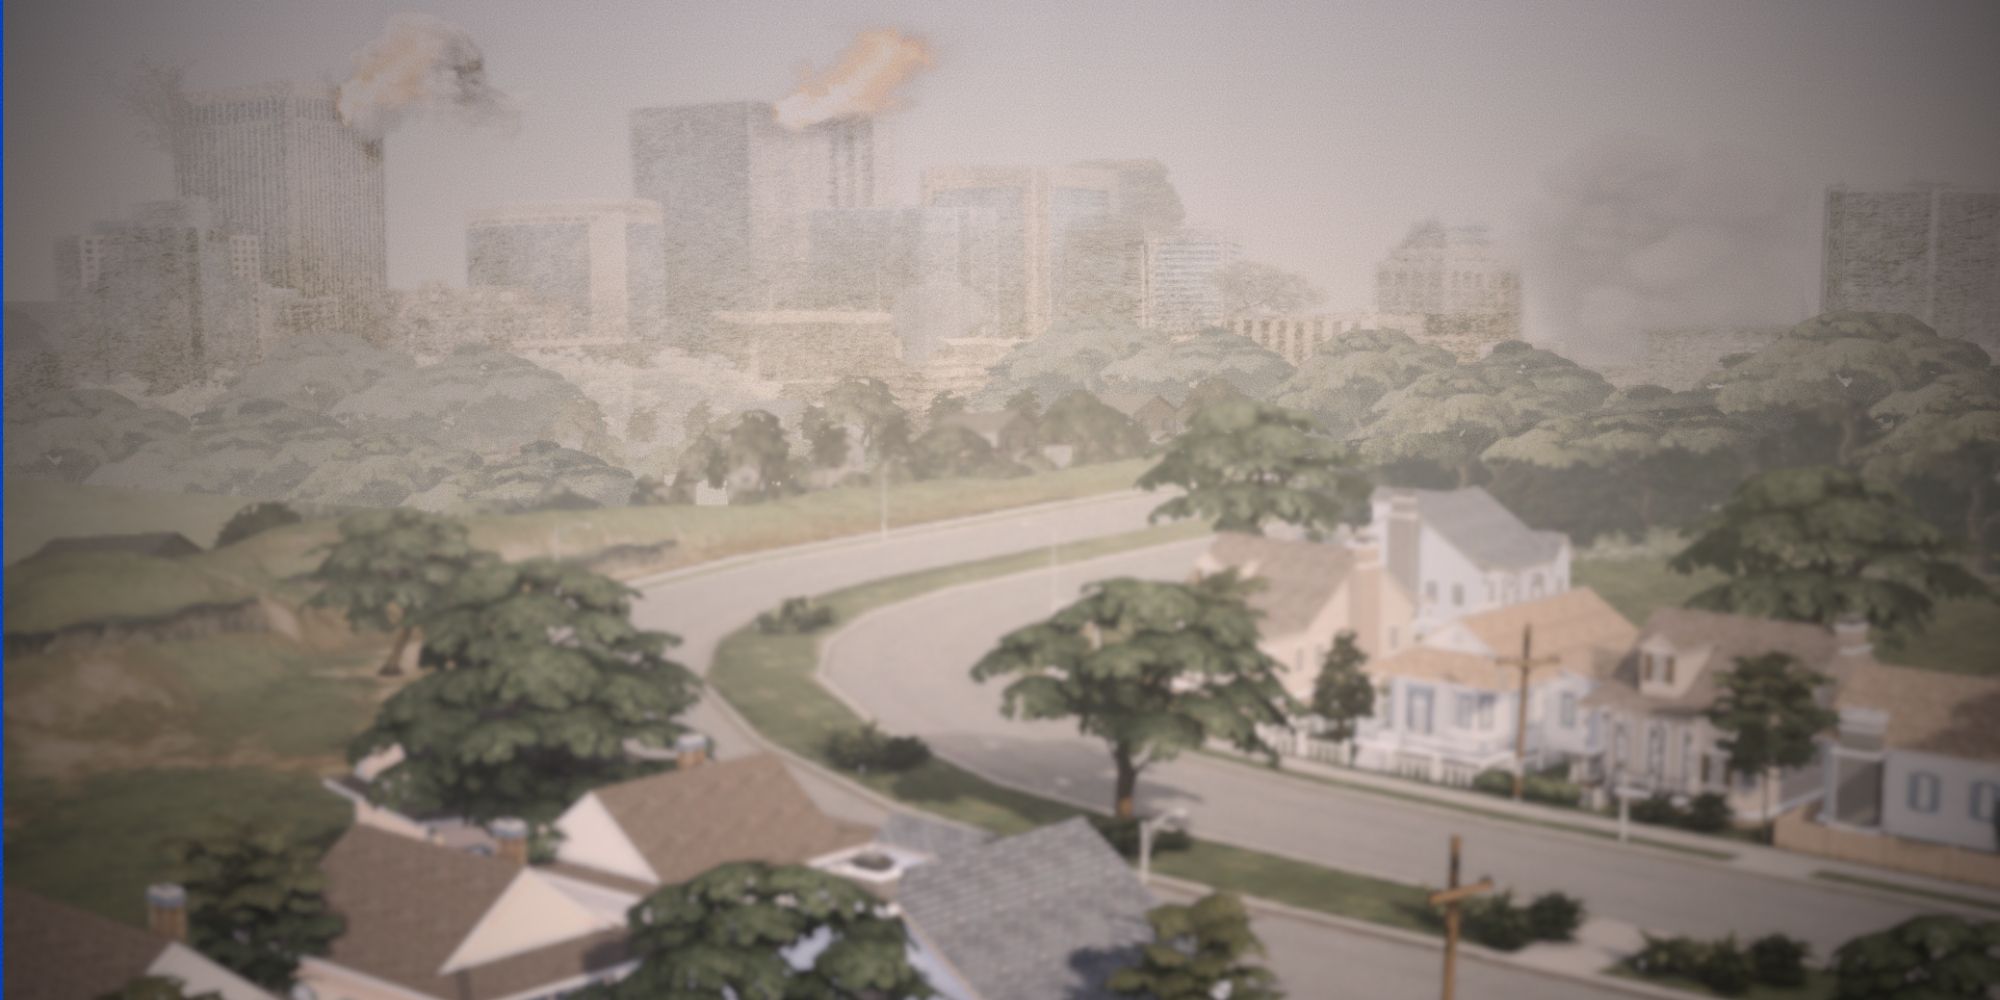 Aerial view of Willow Creek with Bakie's apocalyptic skyline mod installed, showing burning buildings